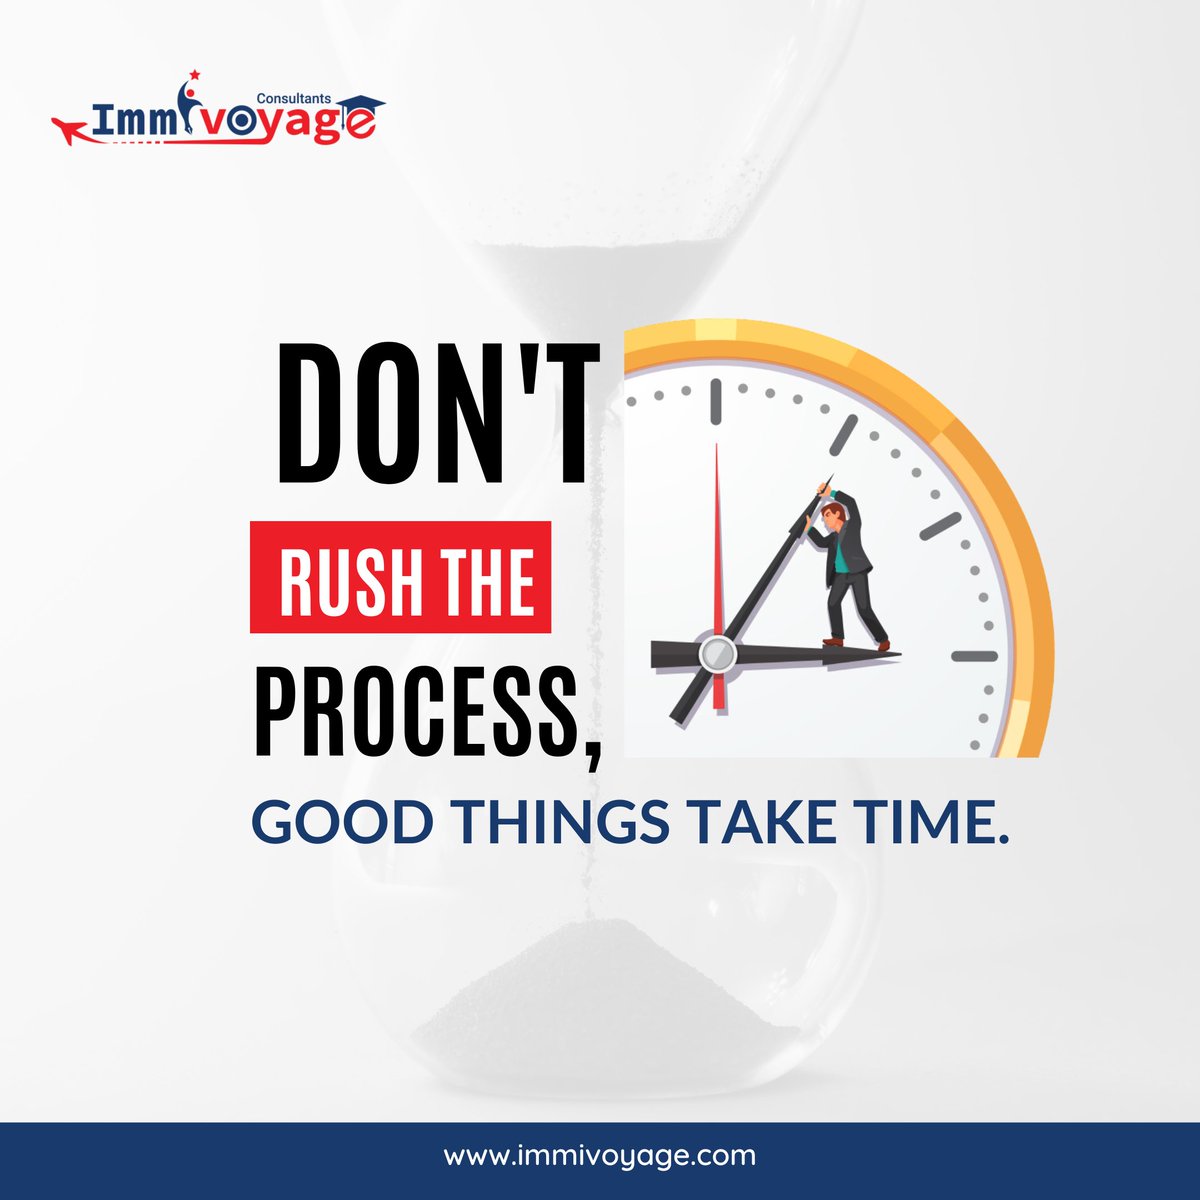 These simple lines highlight the motto of persistence and patience.

In order to achieve success, learn to wait with patience and silently keep on working hard.

Learn More - immivoyage.com

#visaexpert #immivoyage #india #success #immigrationservices #visasuccess